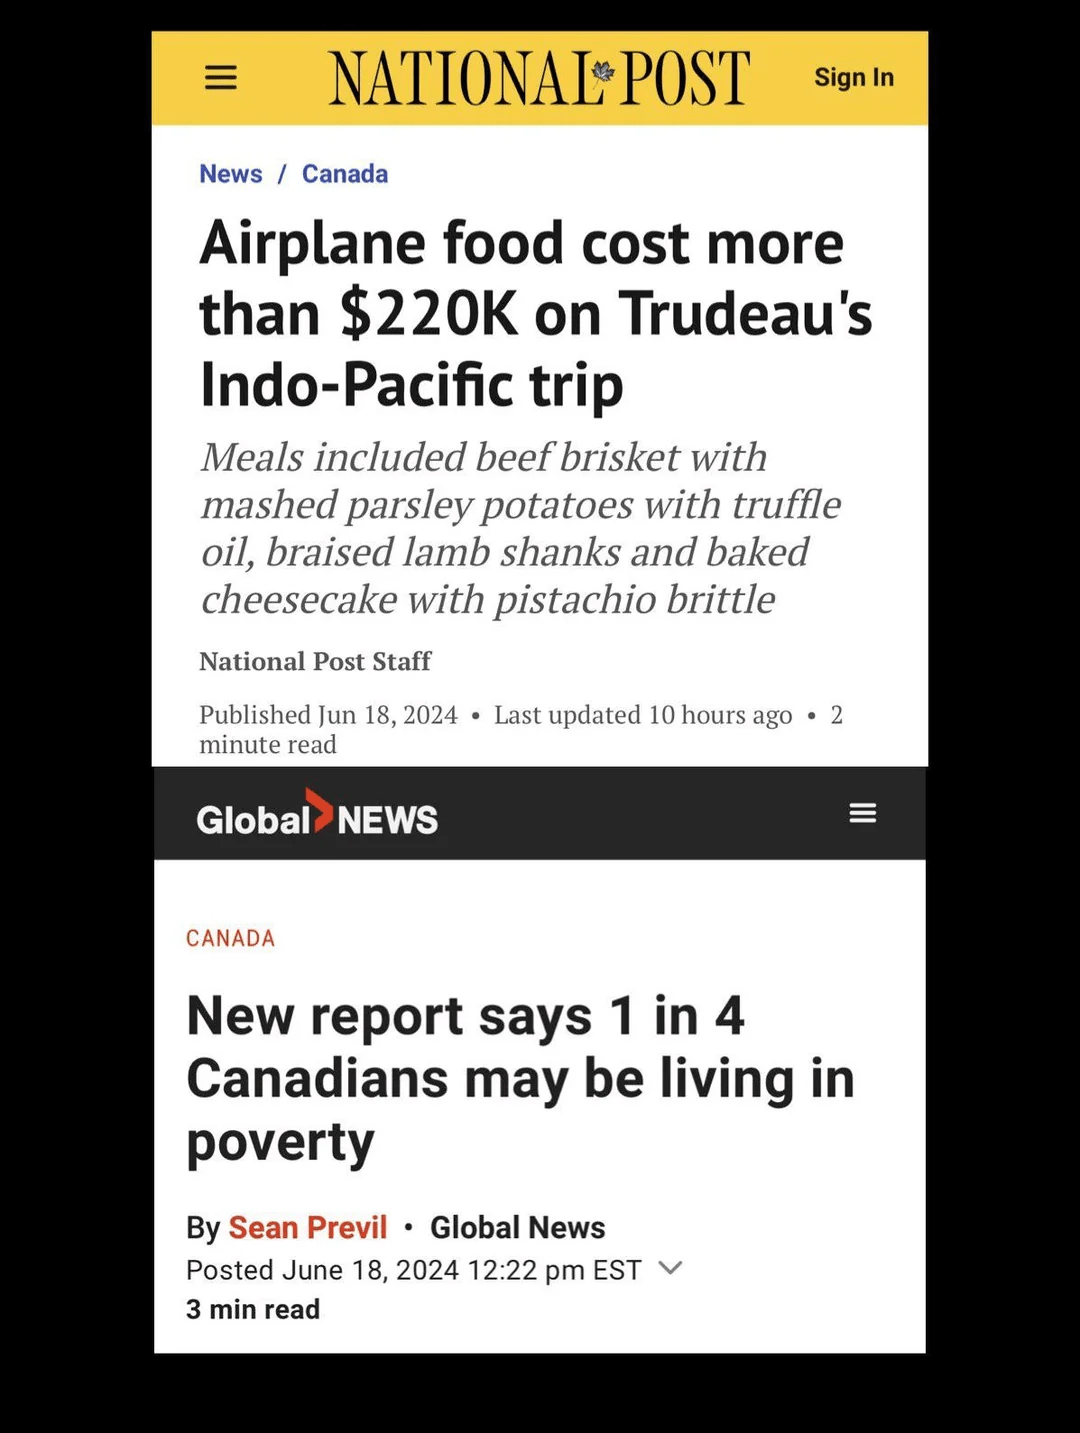 two-articles-released-on-the-same-day-trudeau-friends-fill-v0-iga3fkpyaj7d1.png